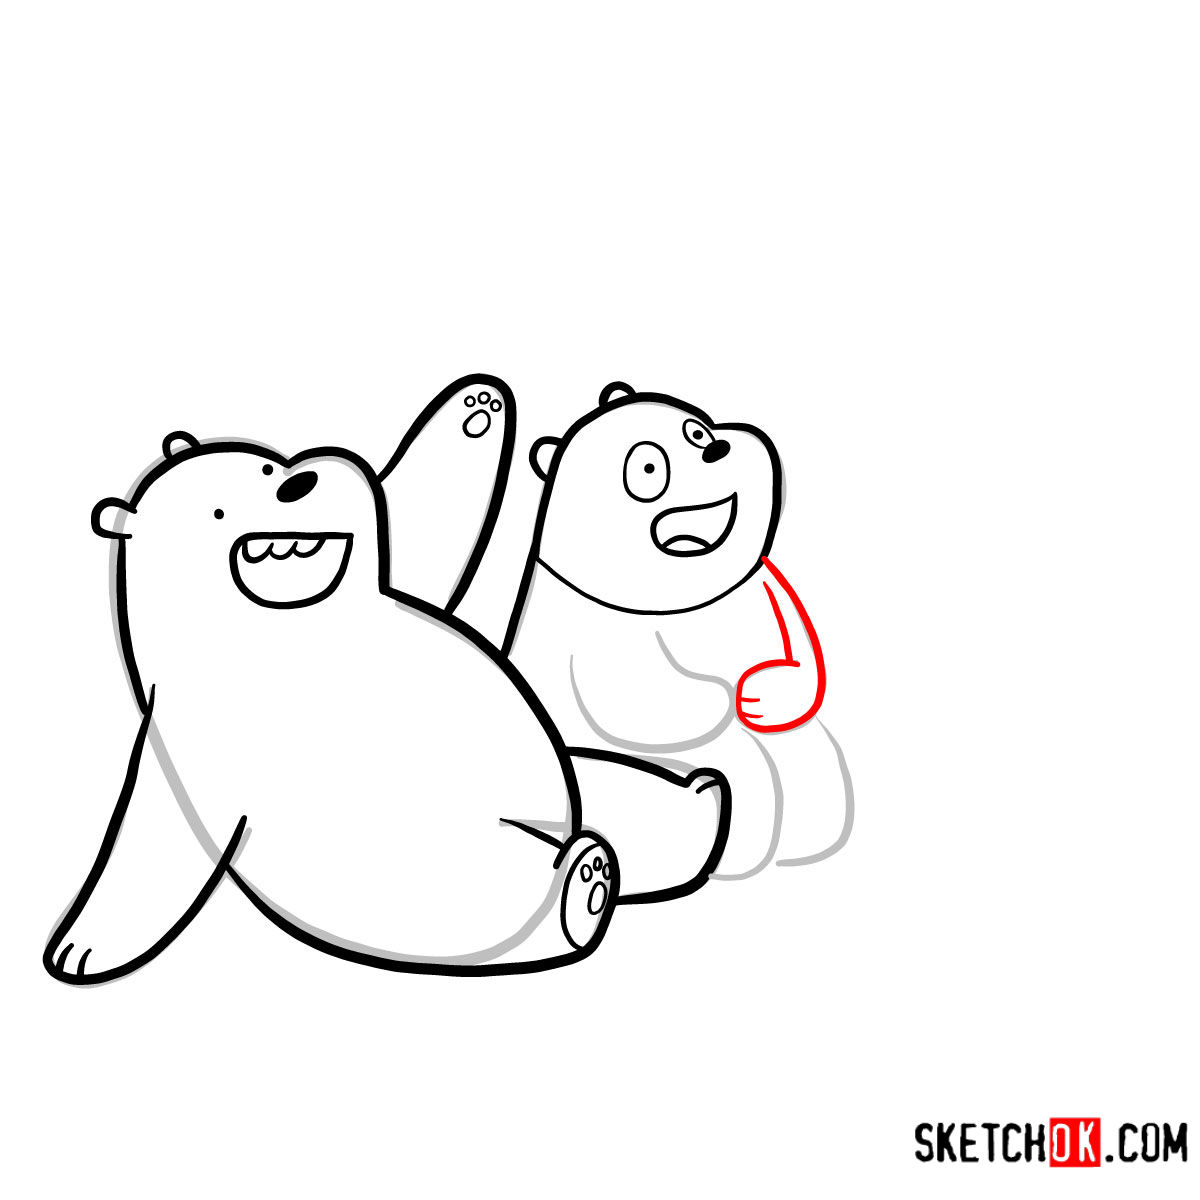 How to draw all three bears together | We Bare Bears - step 11